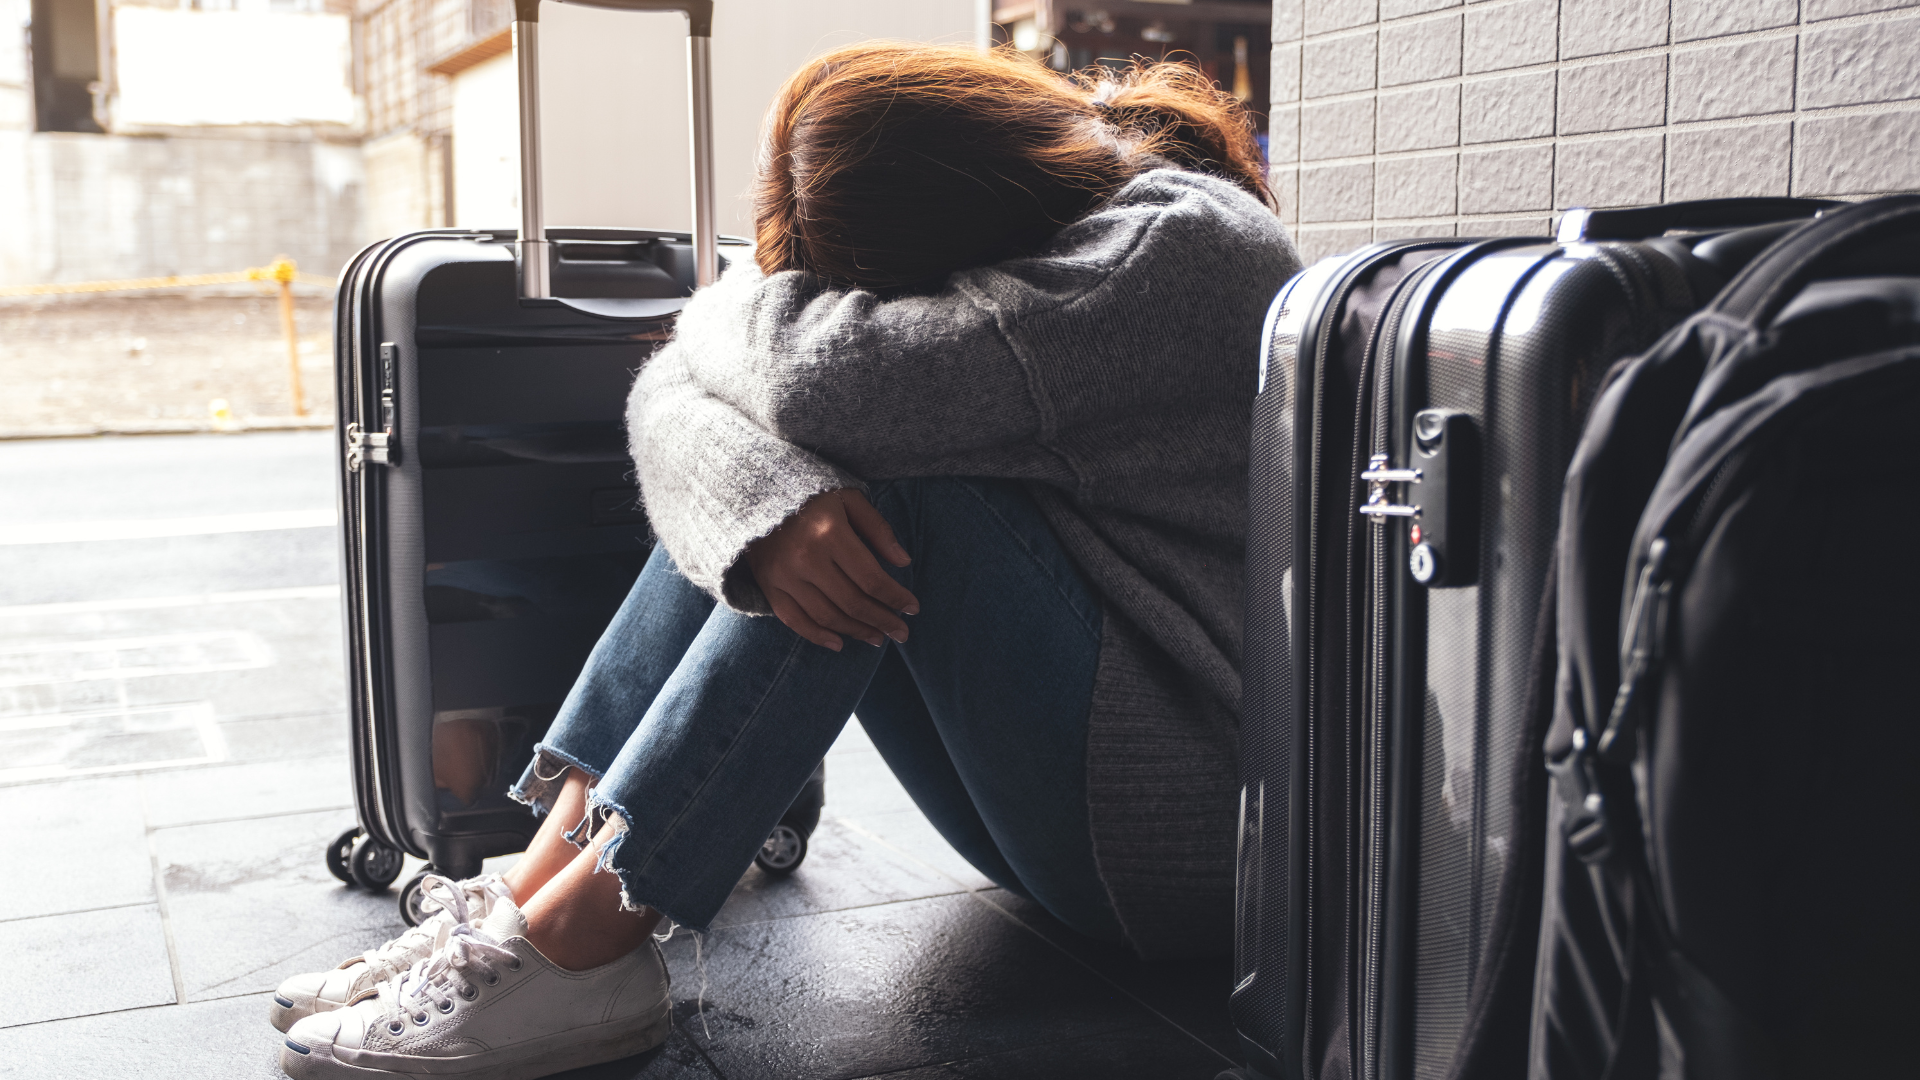 emotional baggage and tension